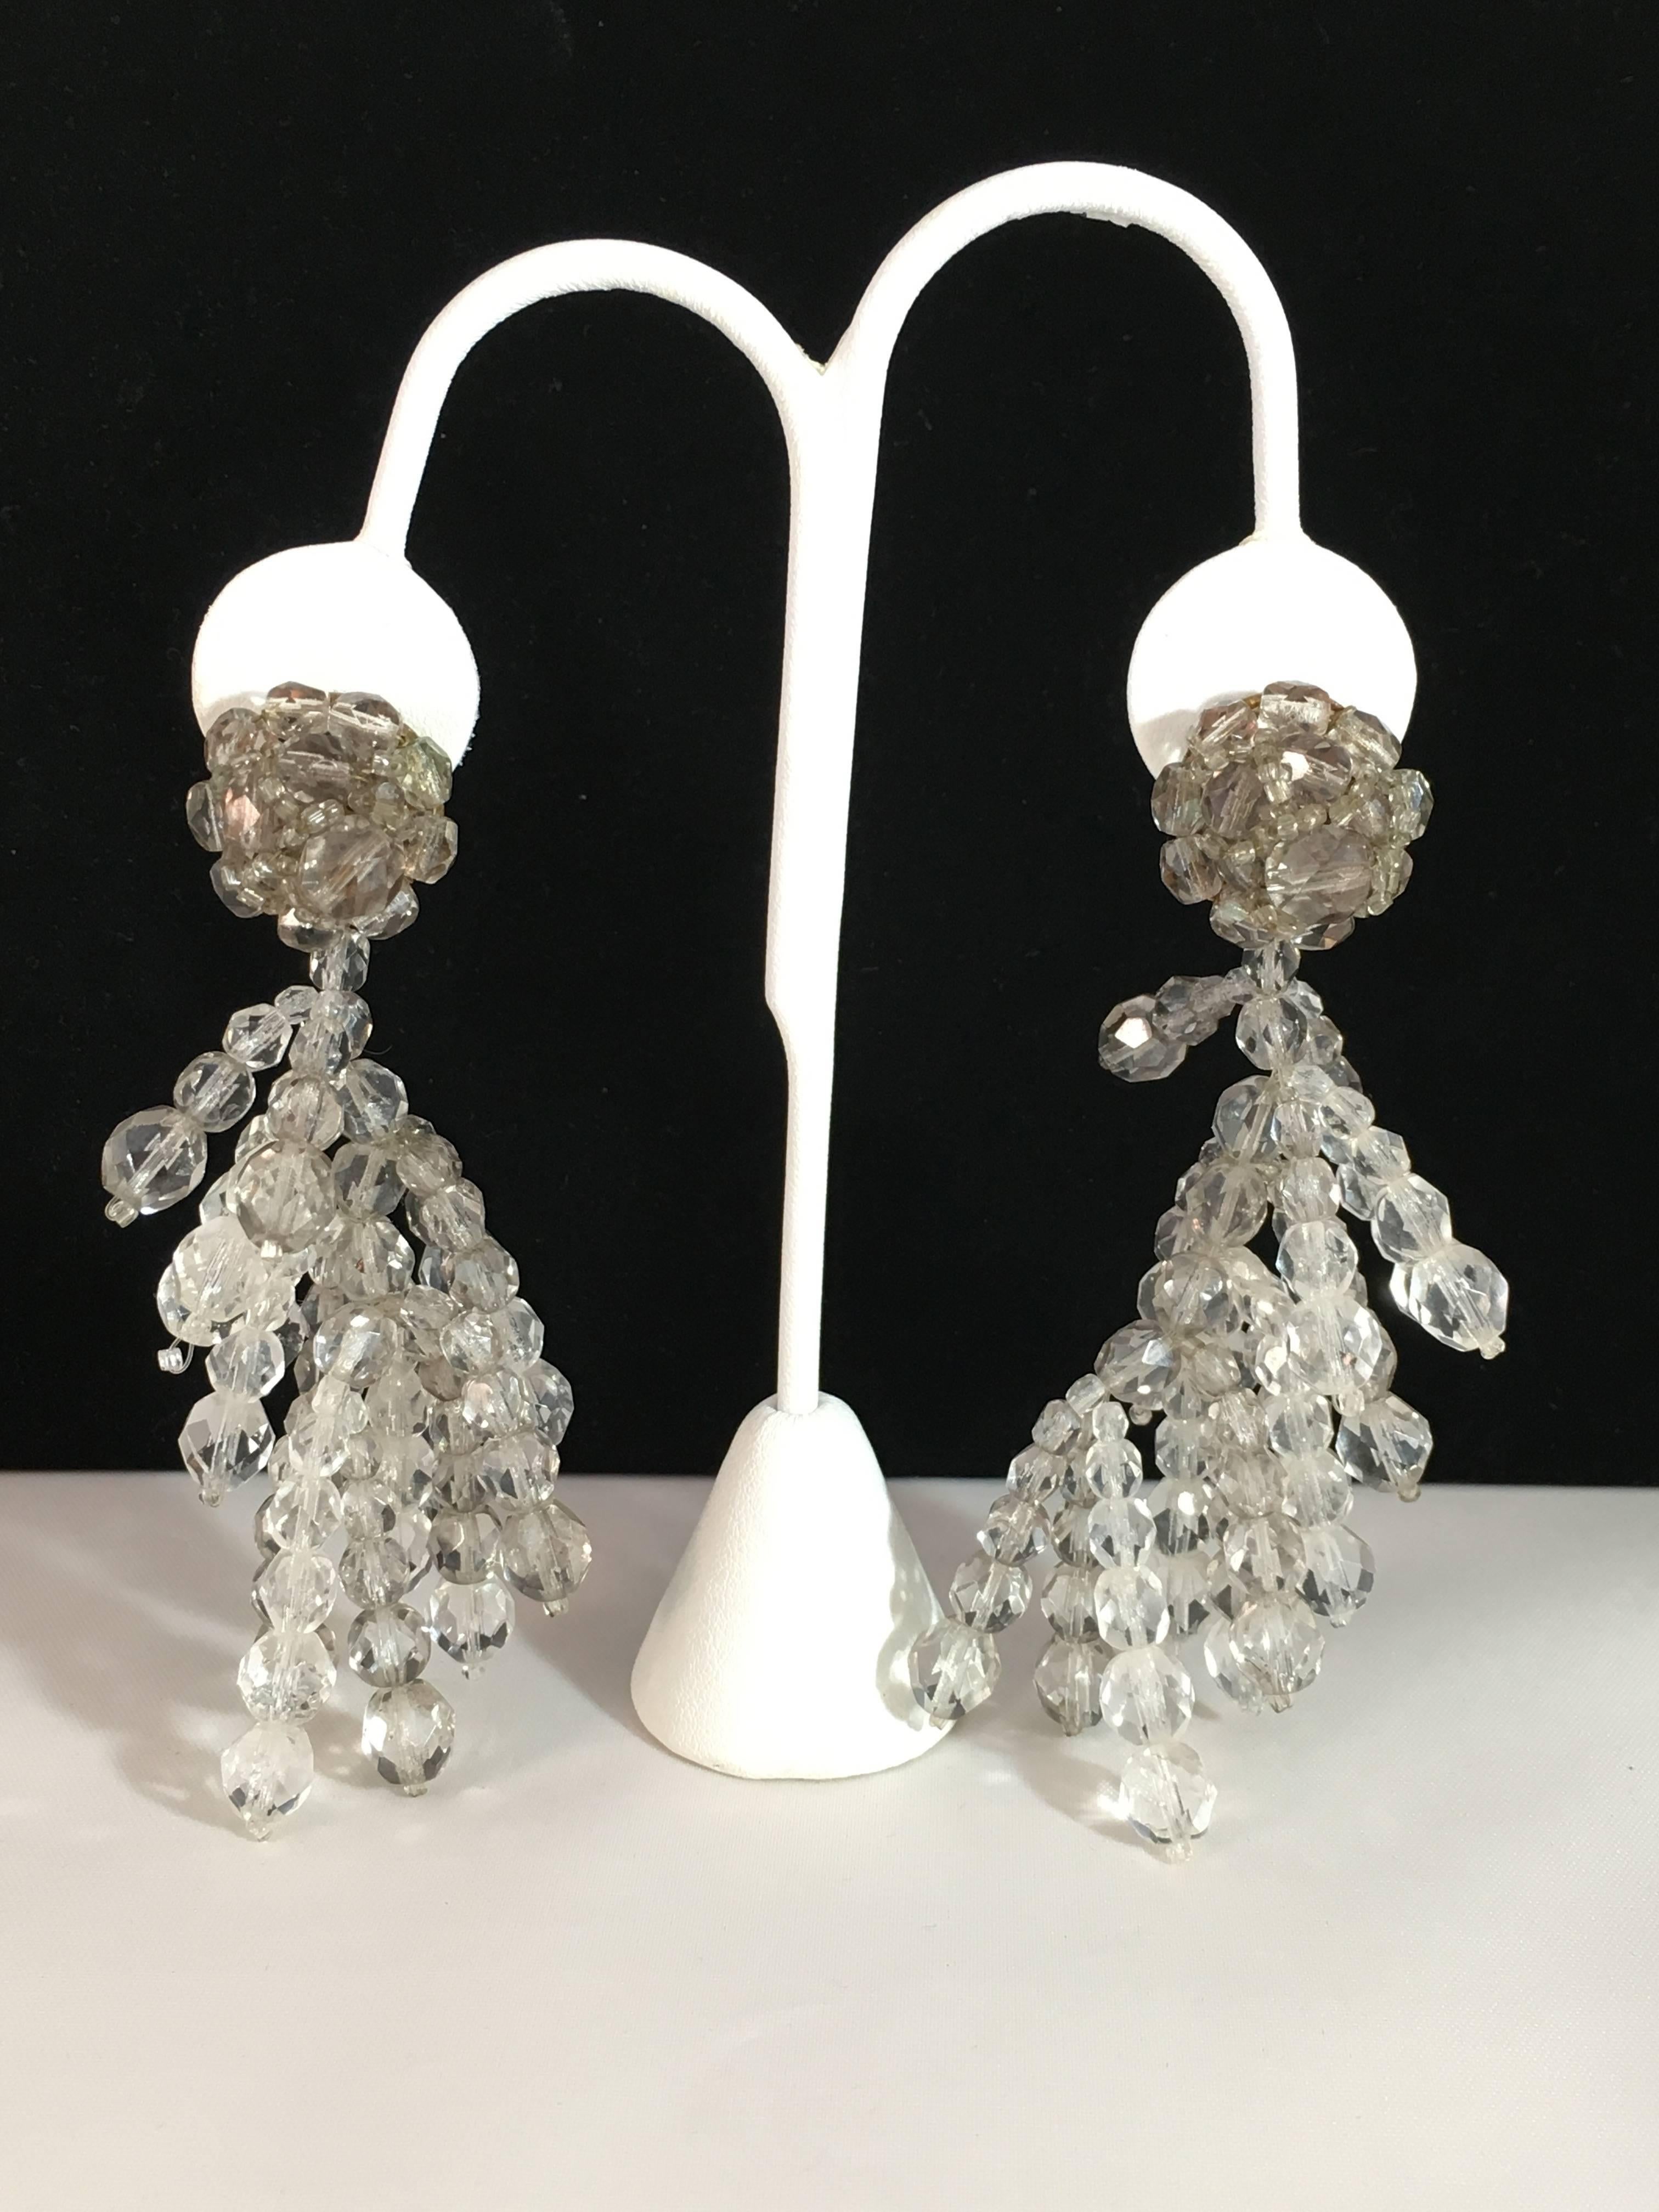 A beautiful pair of 1950s clip-on crystal earrings by the Italian company, Coppola e Toppo.  They measure 4" long and 1 1/2" at their widest point. They are signed on the back, 'Made in Italy by Coppola e Toppo'. They are in excellent